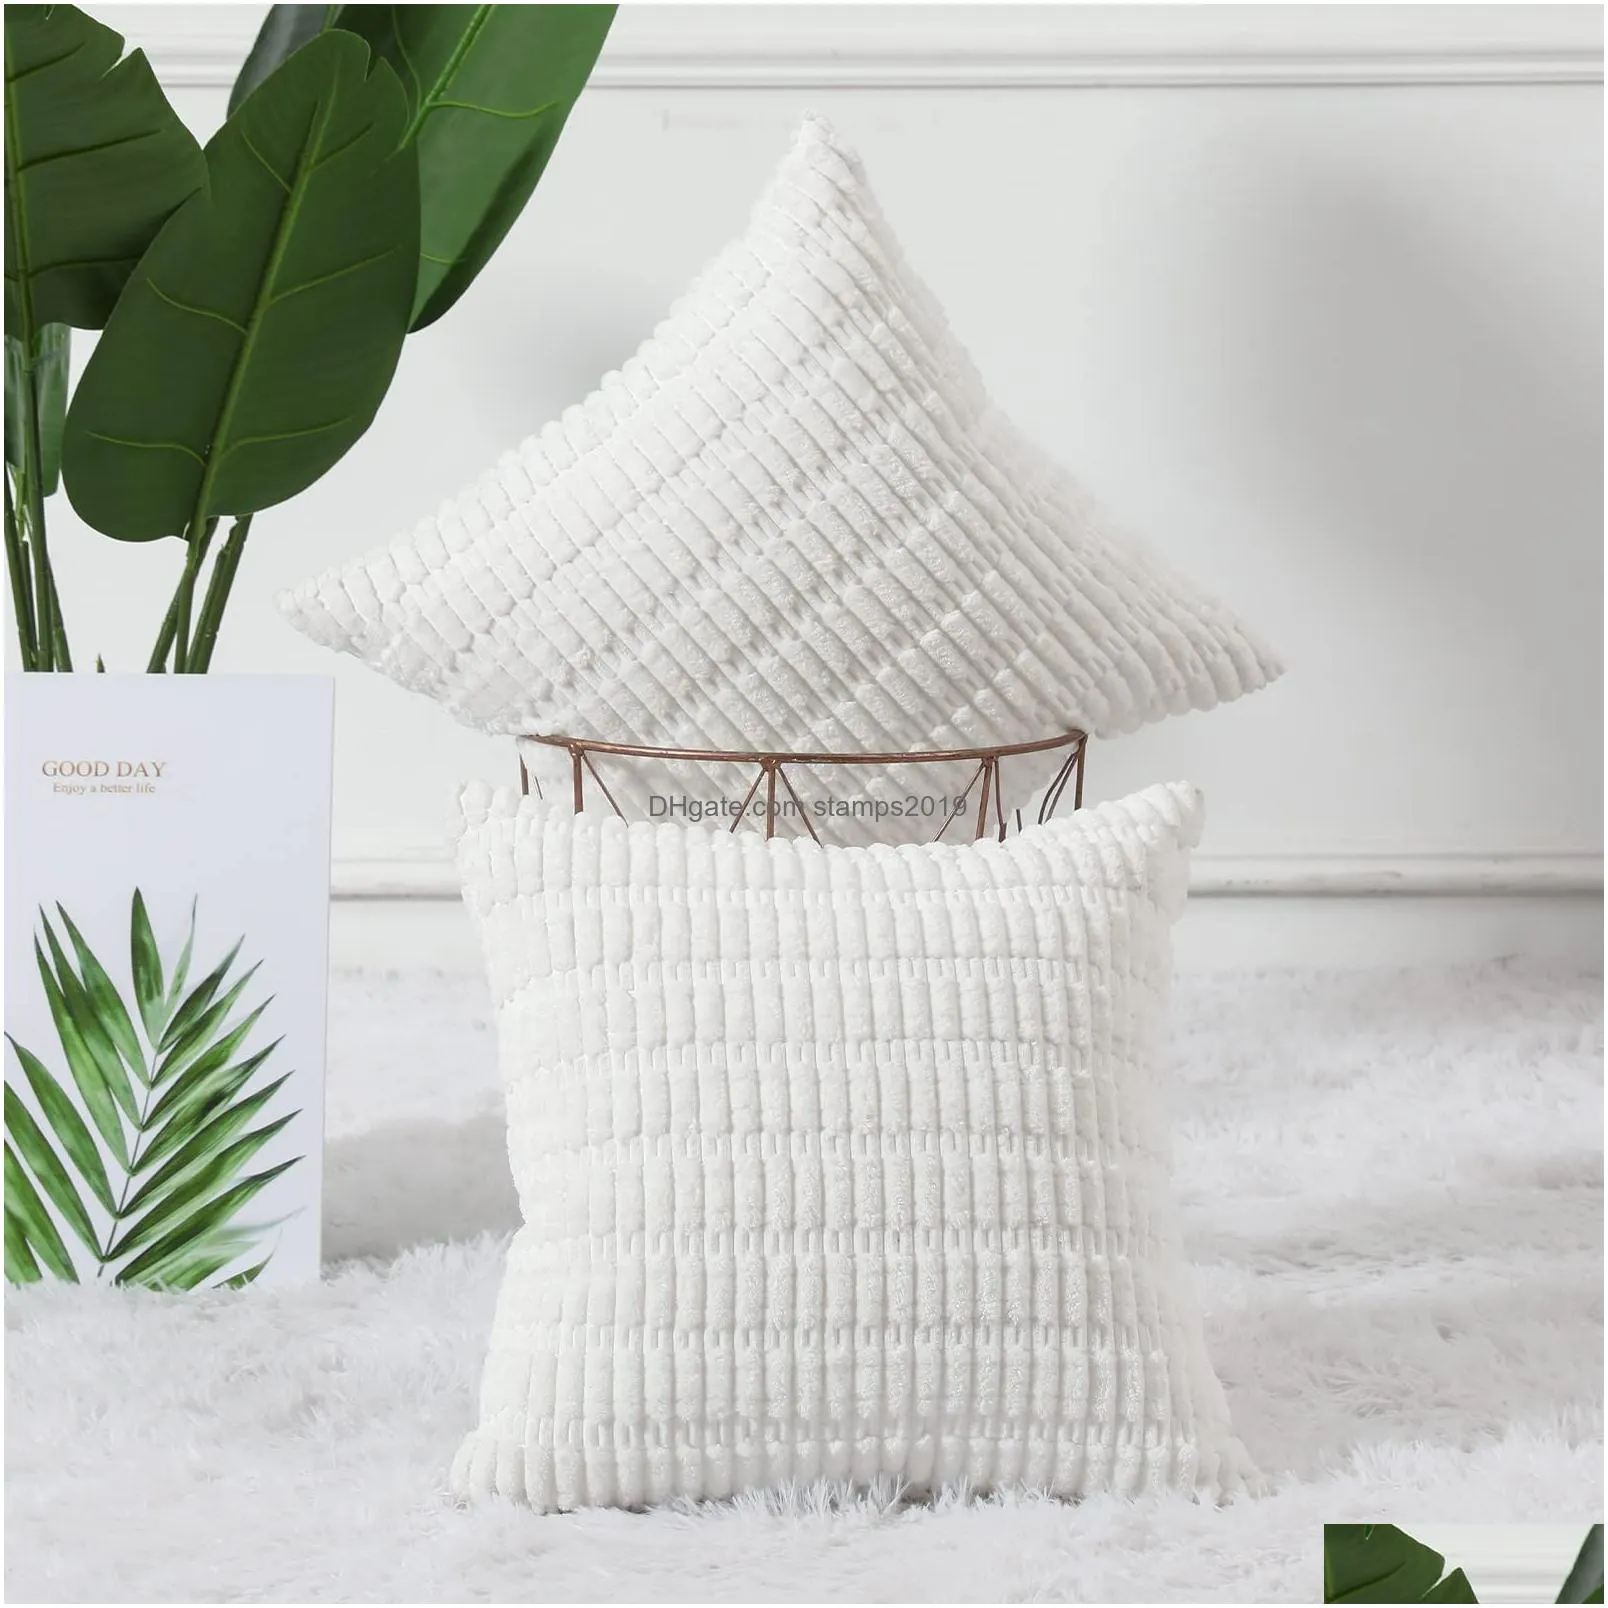 corduroy decorative throw pillow covers 18x18 inch soft cushion pillowcase home decor for modern farmhouse sofa living room couch bed